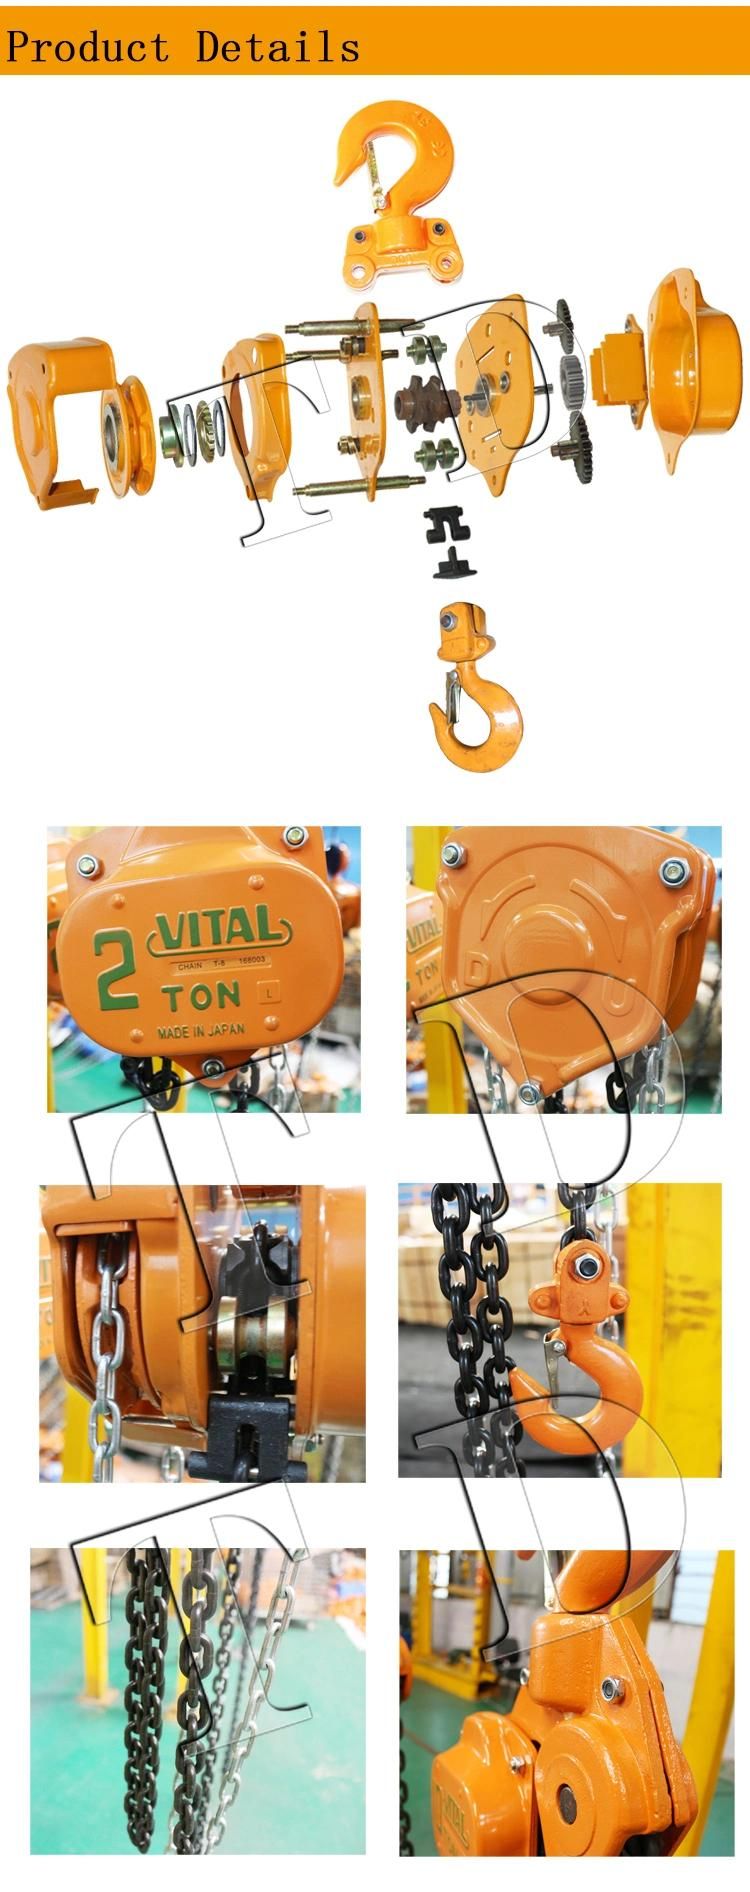 Manual Chain Block with G80 Chain Chain Pulley Block